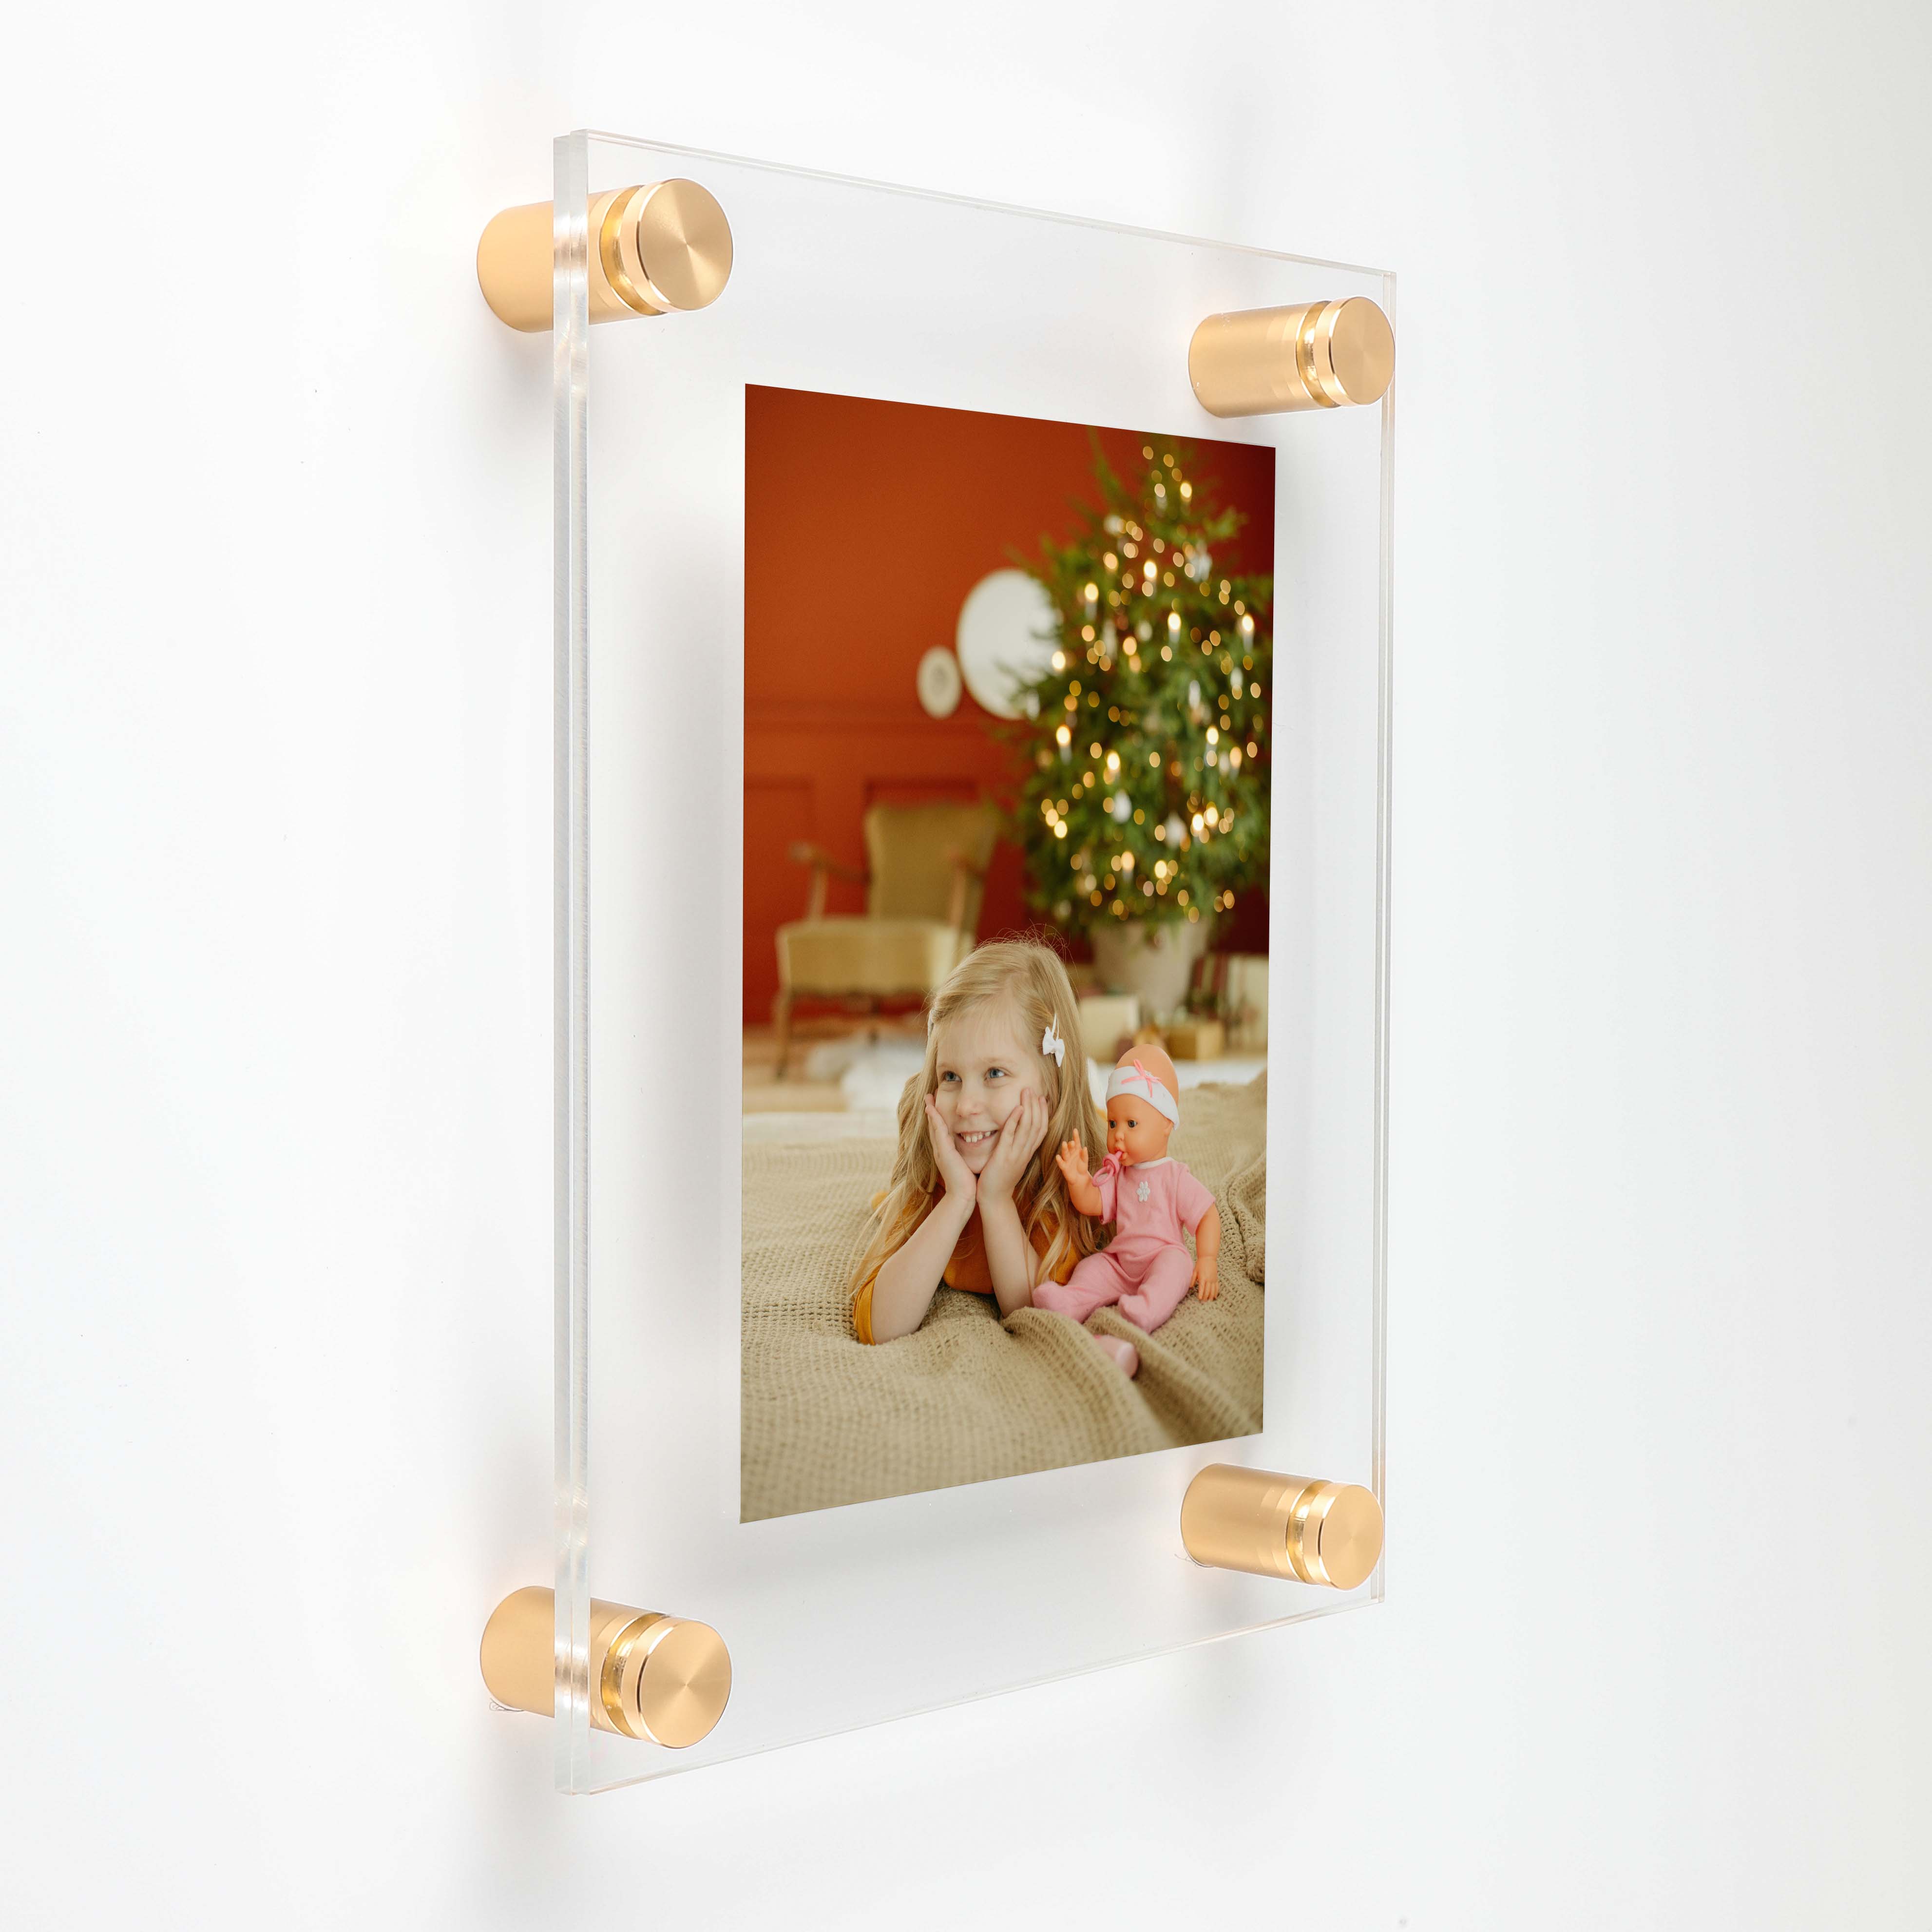 (2) 19-3/4'' x 26'' Clear Acrylics , Pre-Drilled With Polished Edges (Thick 3/16'' each), Wall Frame with (4) 5/8'' x 1'' Champagne Anodized Aluminum Standoffs includes Screws and Anchors